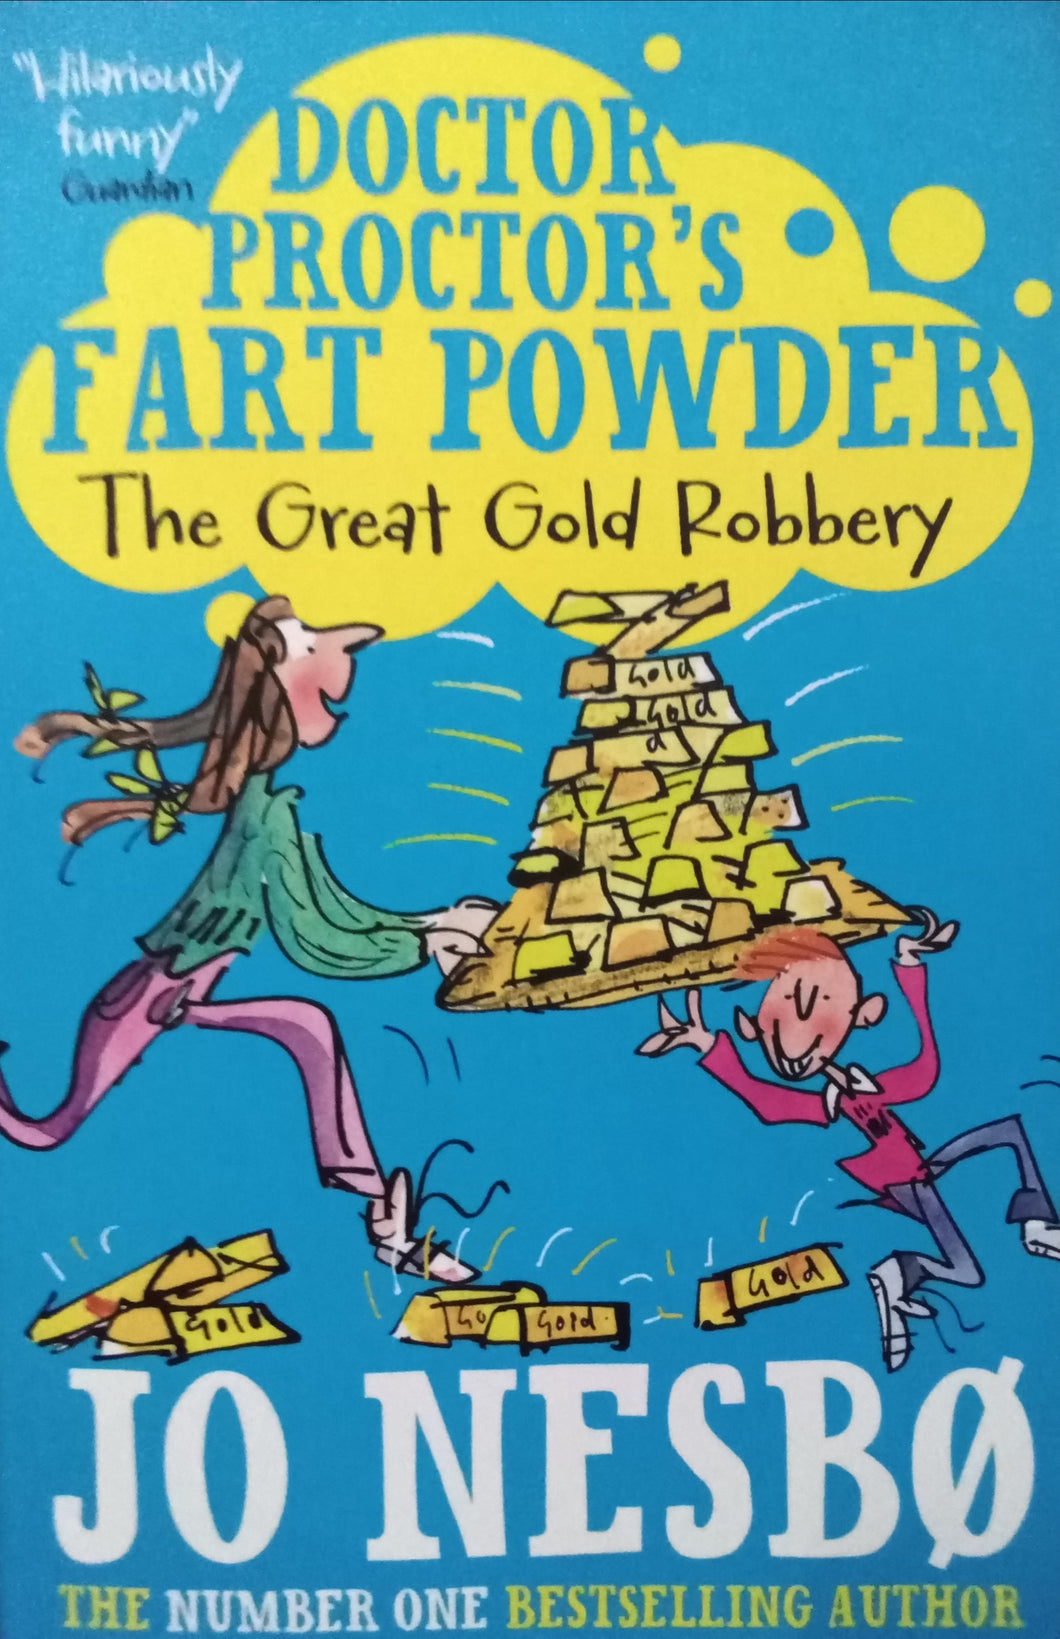 Doctor Proctor's Fart Powder: The Great Gold Robbery by Jo Nesbo